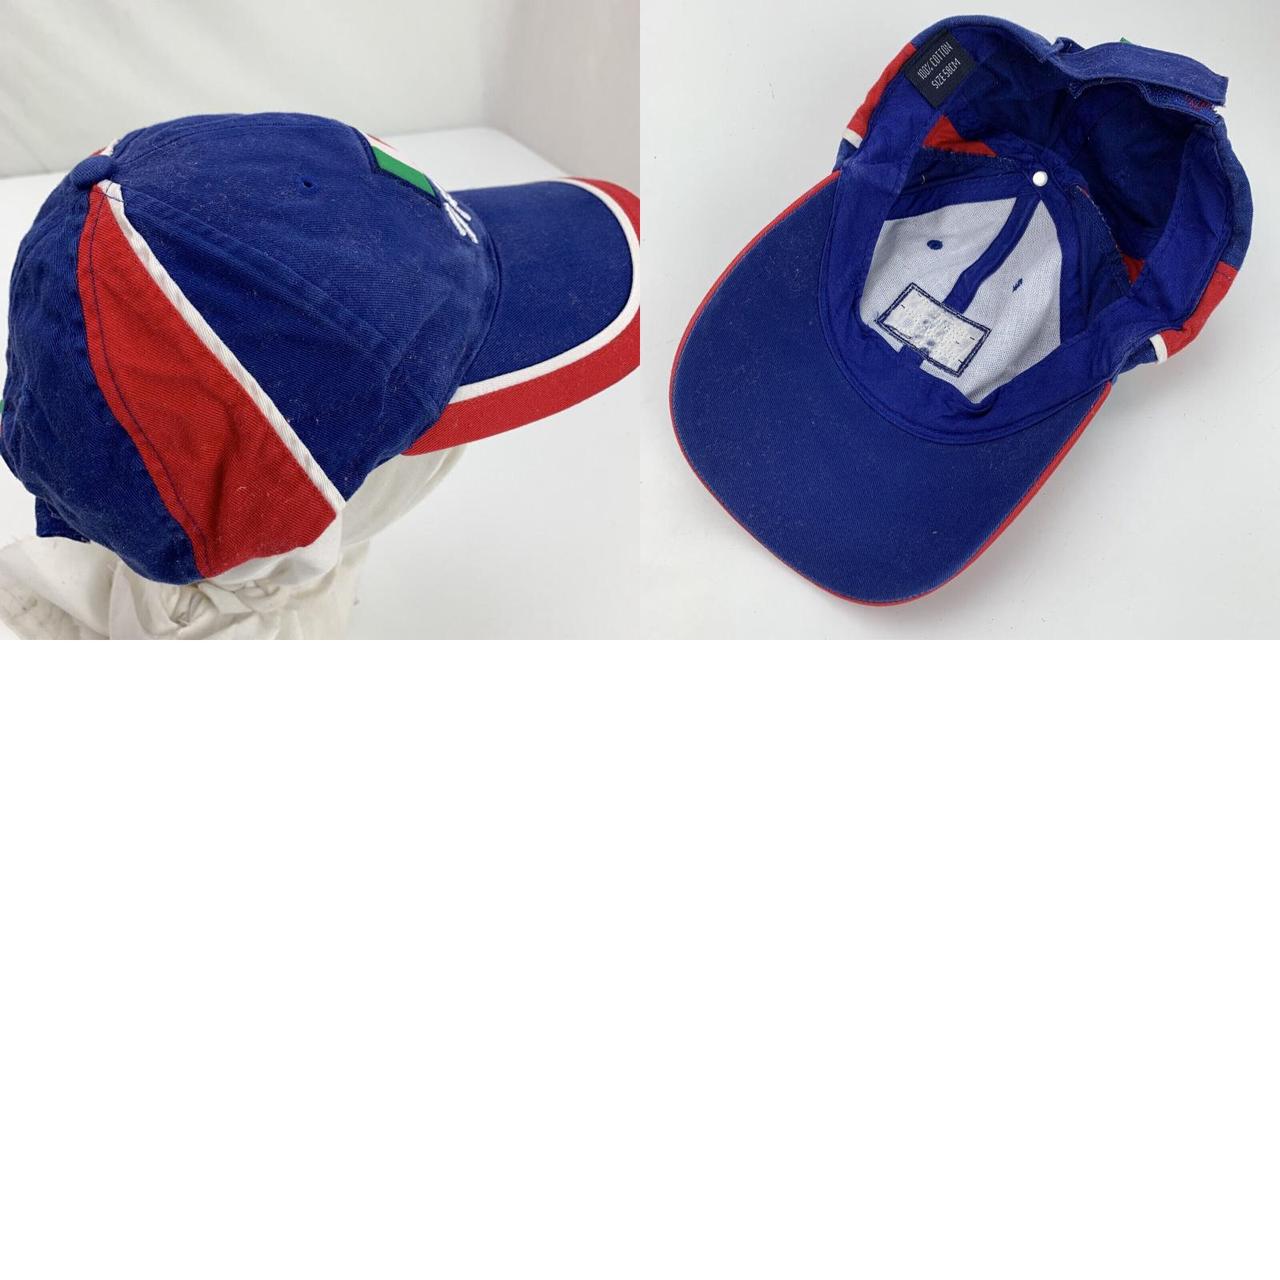 Fred Men's Blue and Red Hat (4)